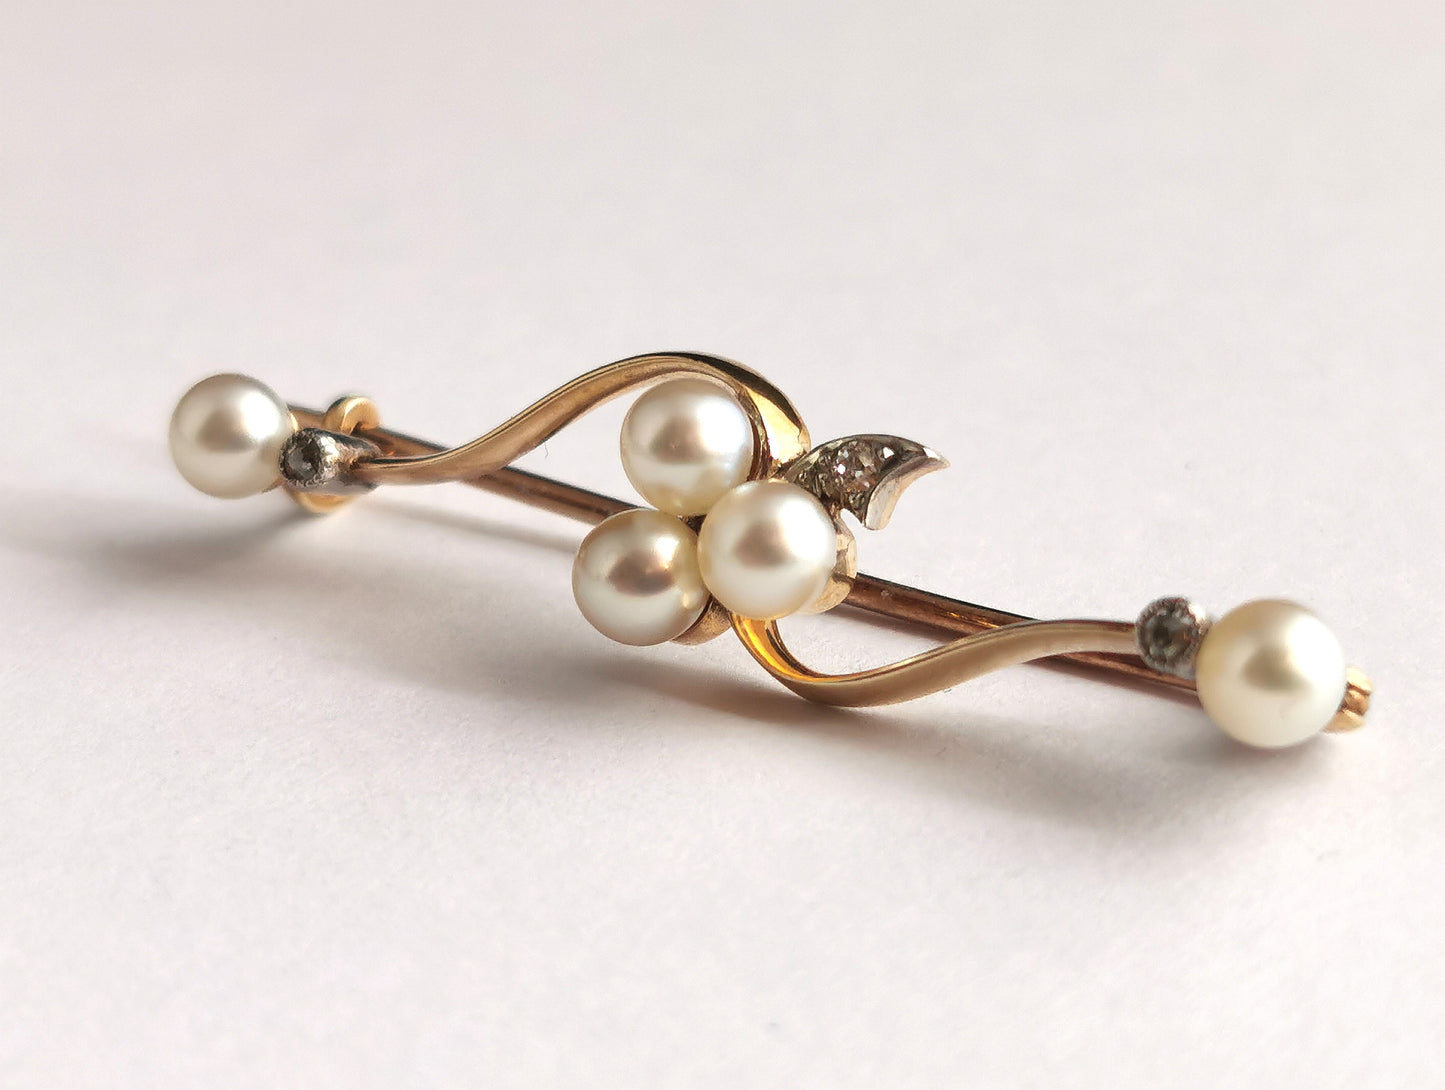 Antique Diamond and pearl shamrock brooch, 9ct gold and silver